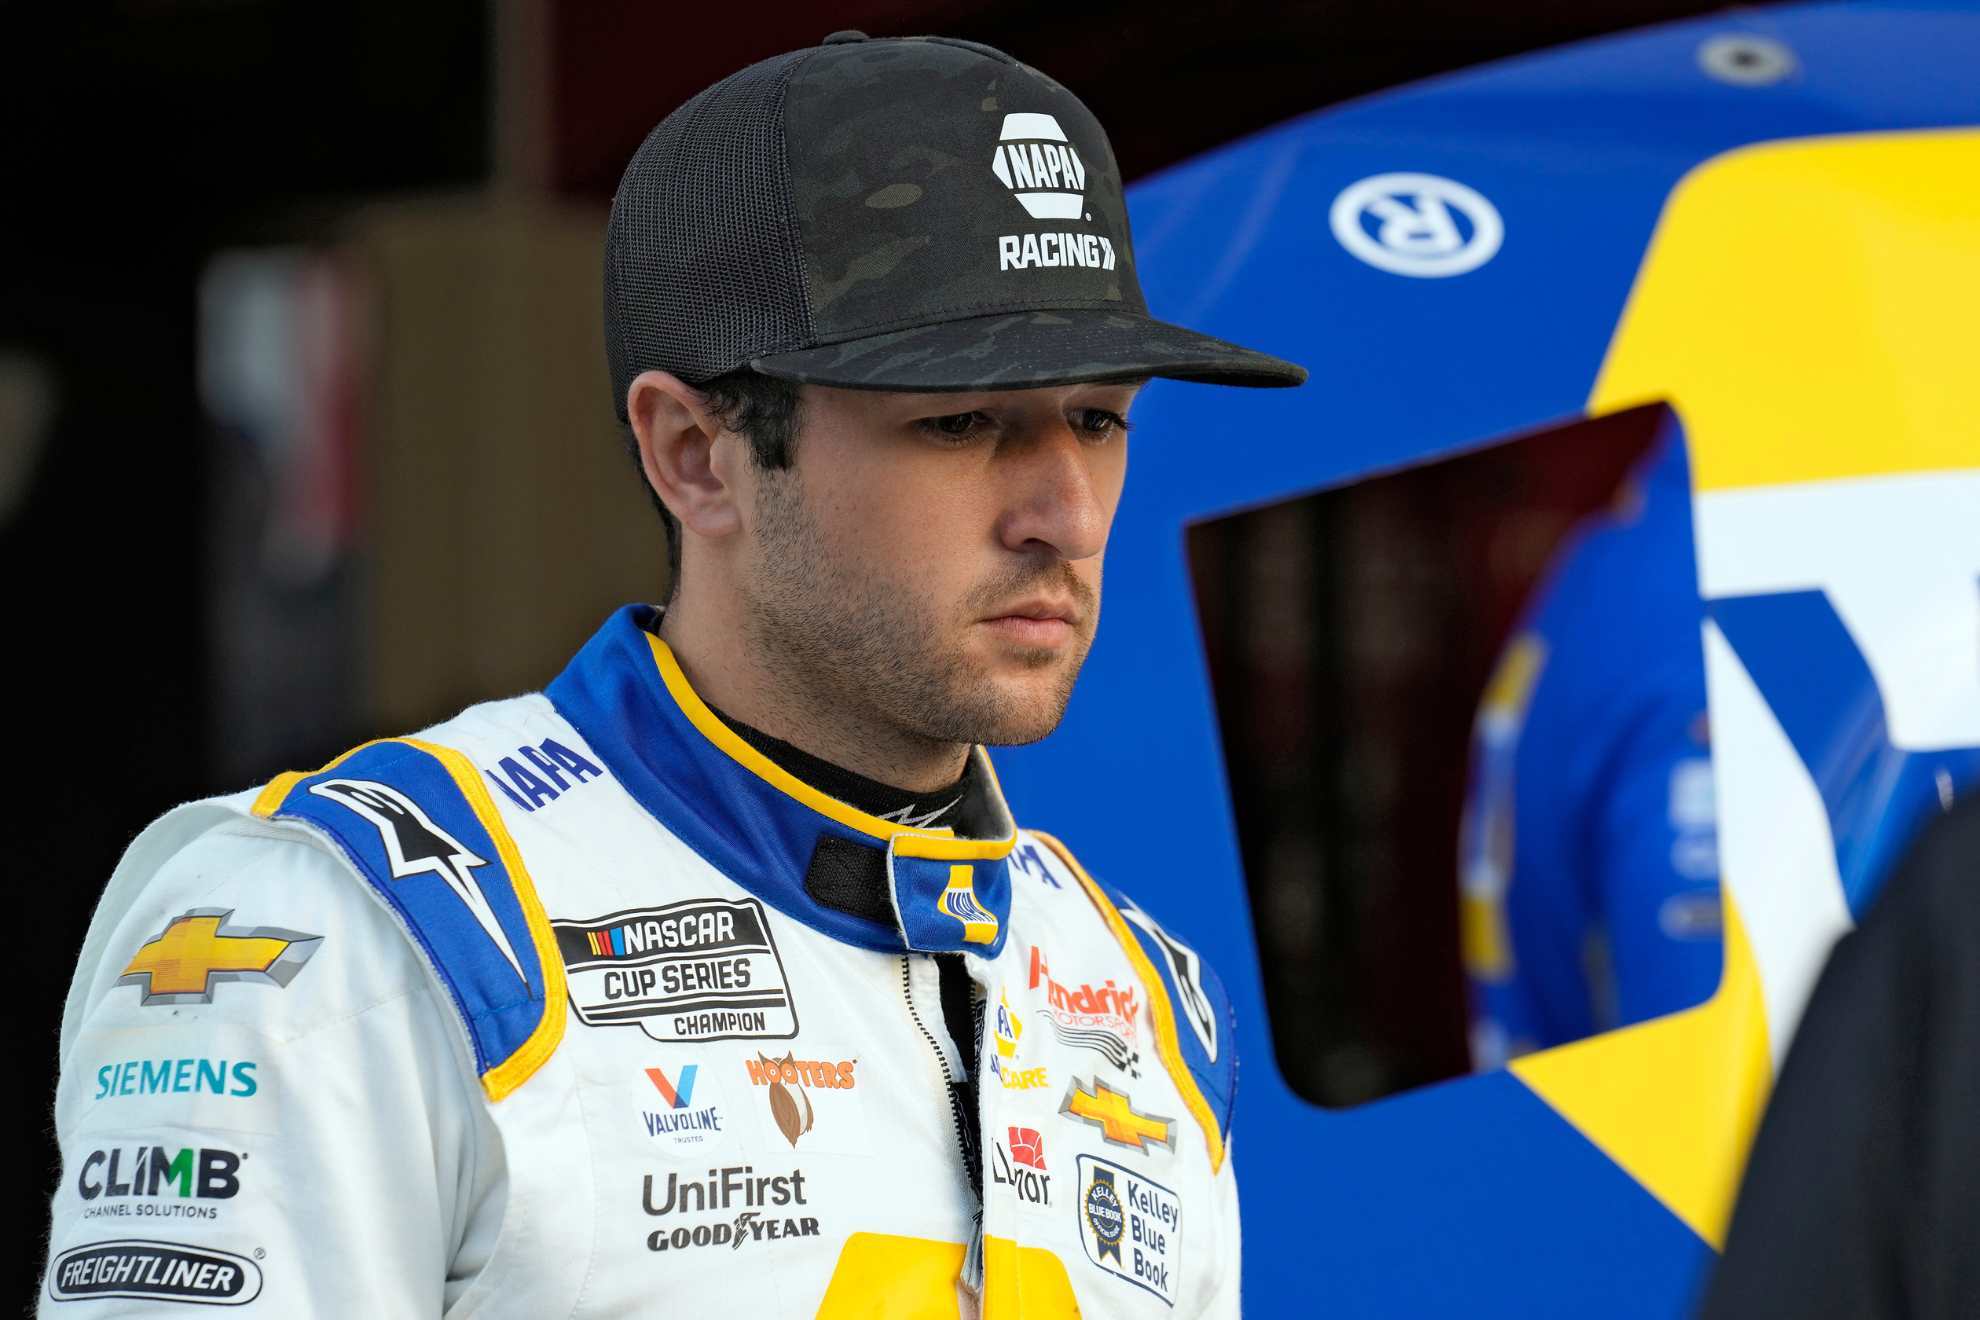 NASCAR star Chase Elliott suffered a significant leg injury while snowboarding in Colorado.